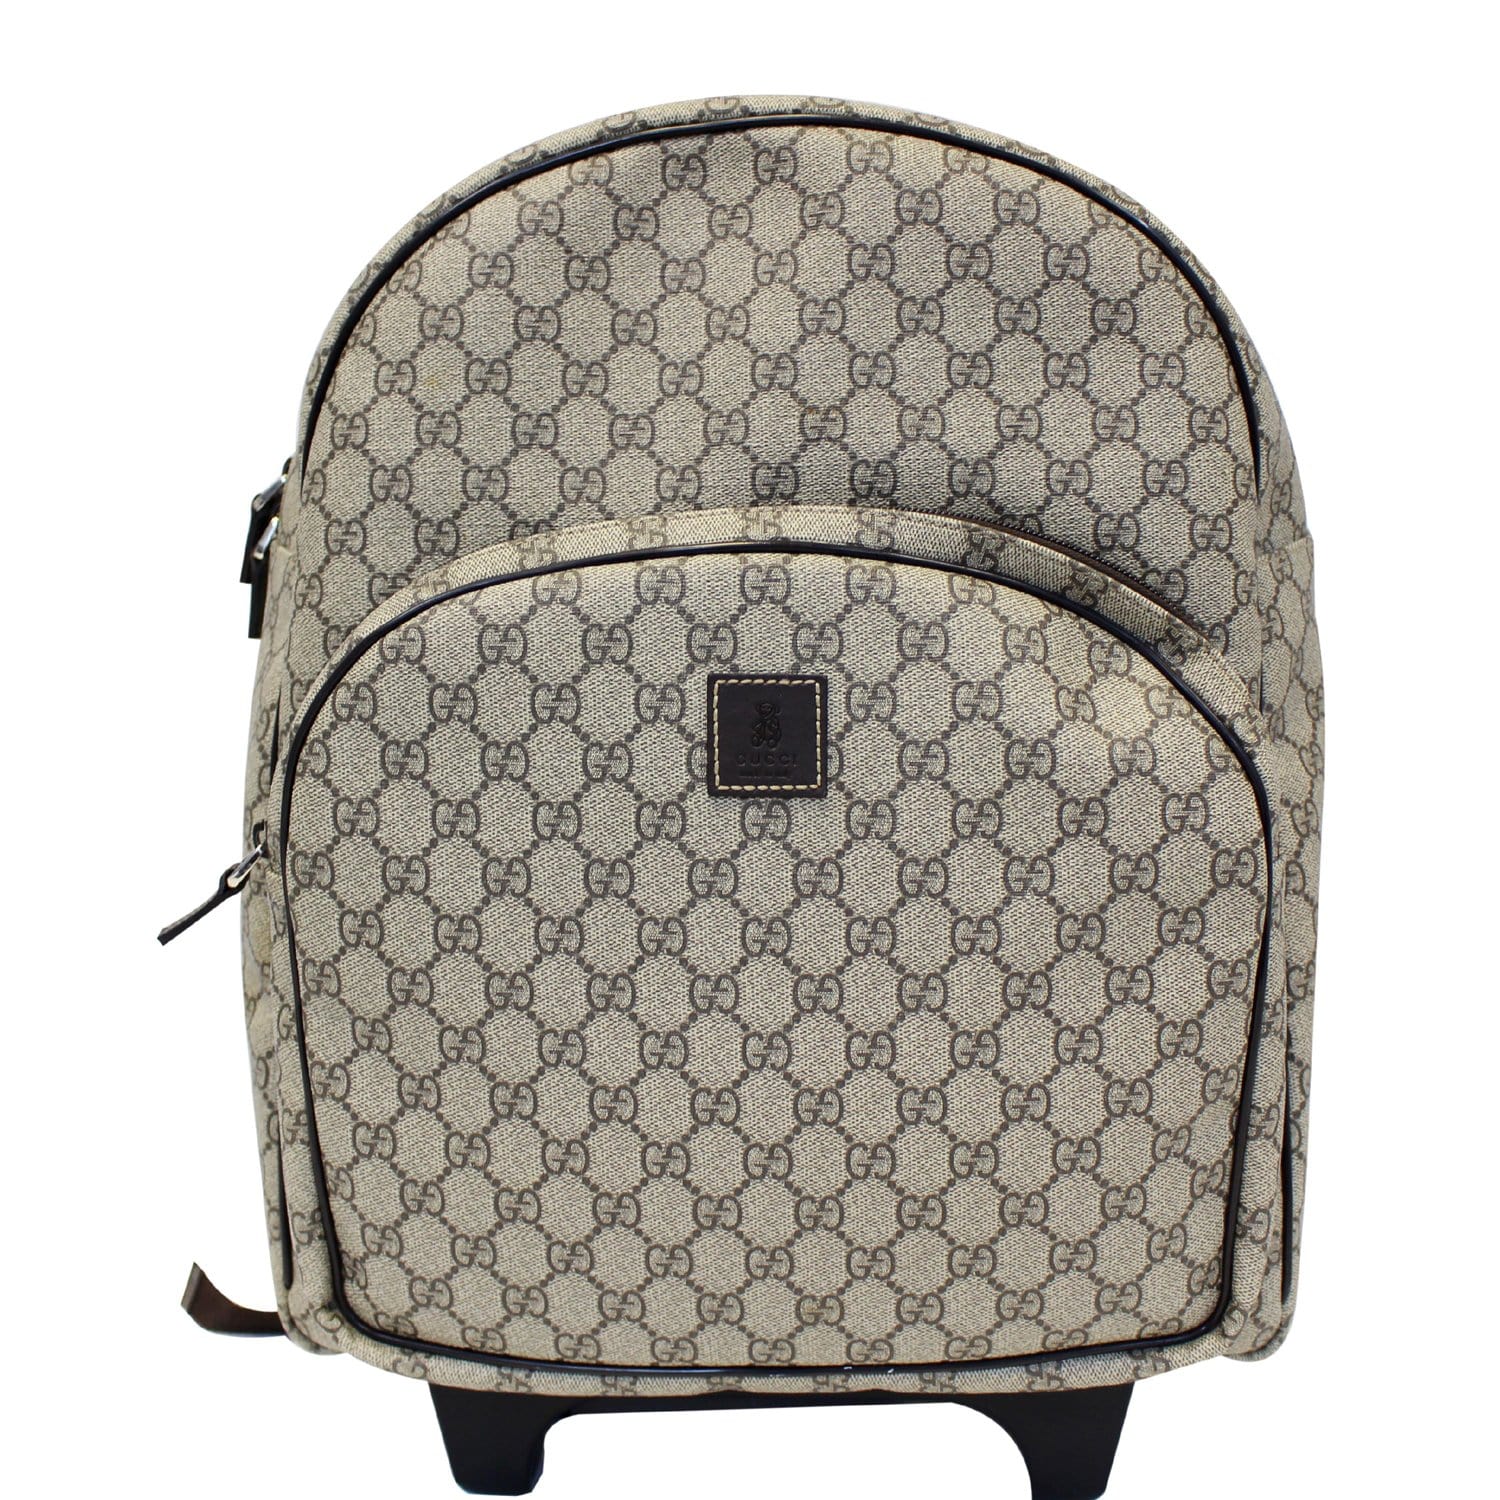 Gucci Backpack From GG Supreme Canvas in Black for Men